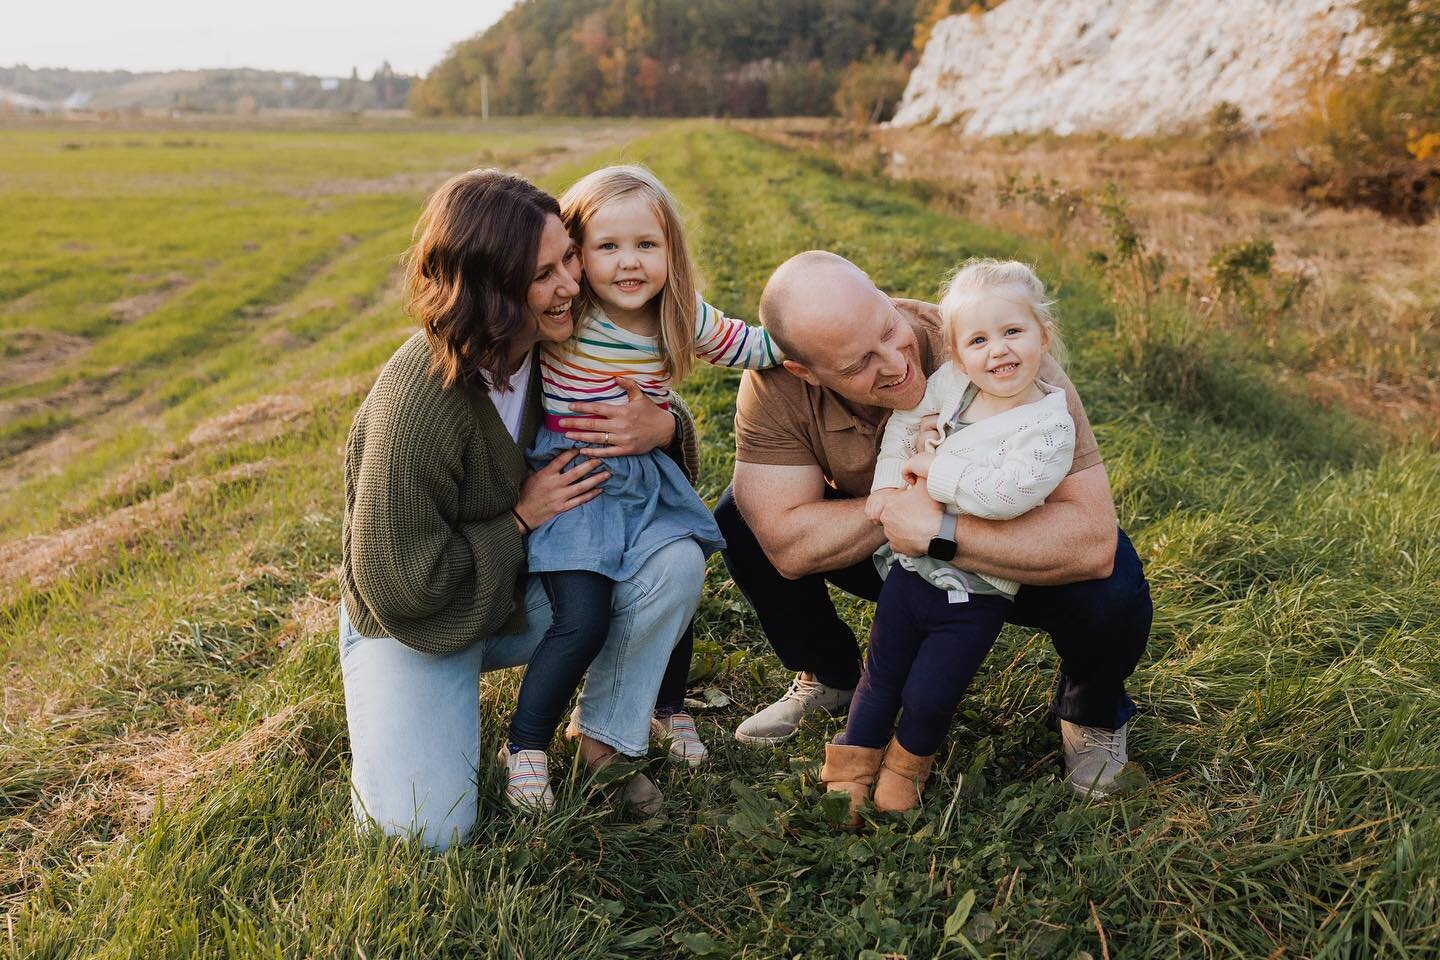 Thank you to the super talented @dave_and_pring for knocking our family photos out of the park!!! We couldn&rsquo;t love them or these photos more (and these are just some of the previews)! ❤️